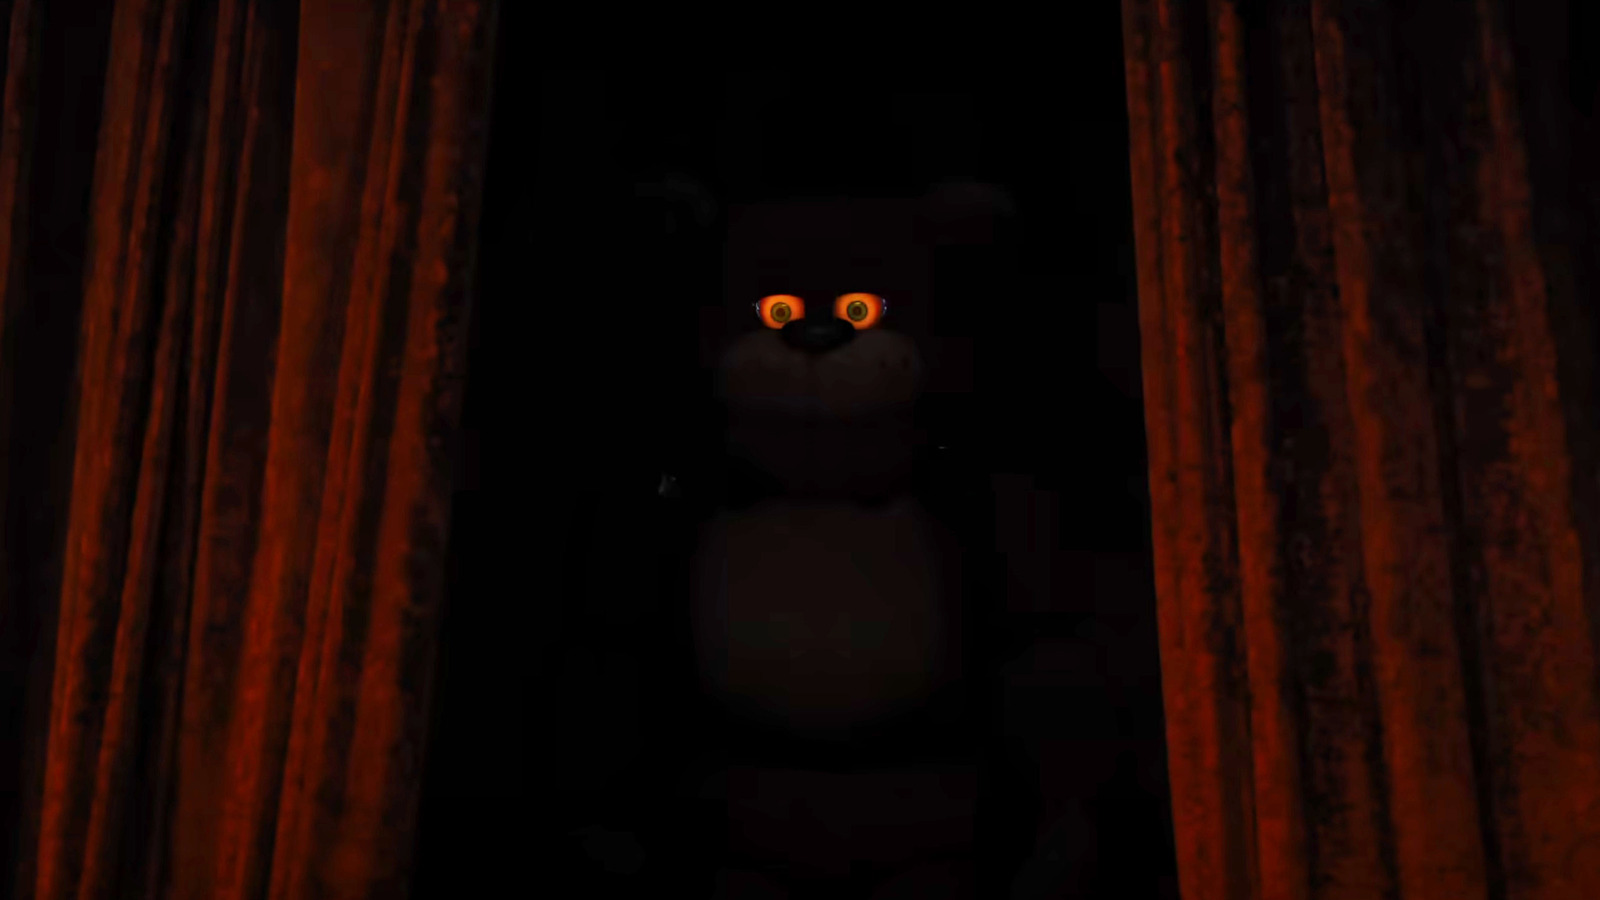 Suggest in the comments what functions animatronics should perform